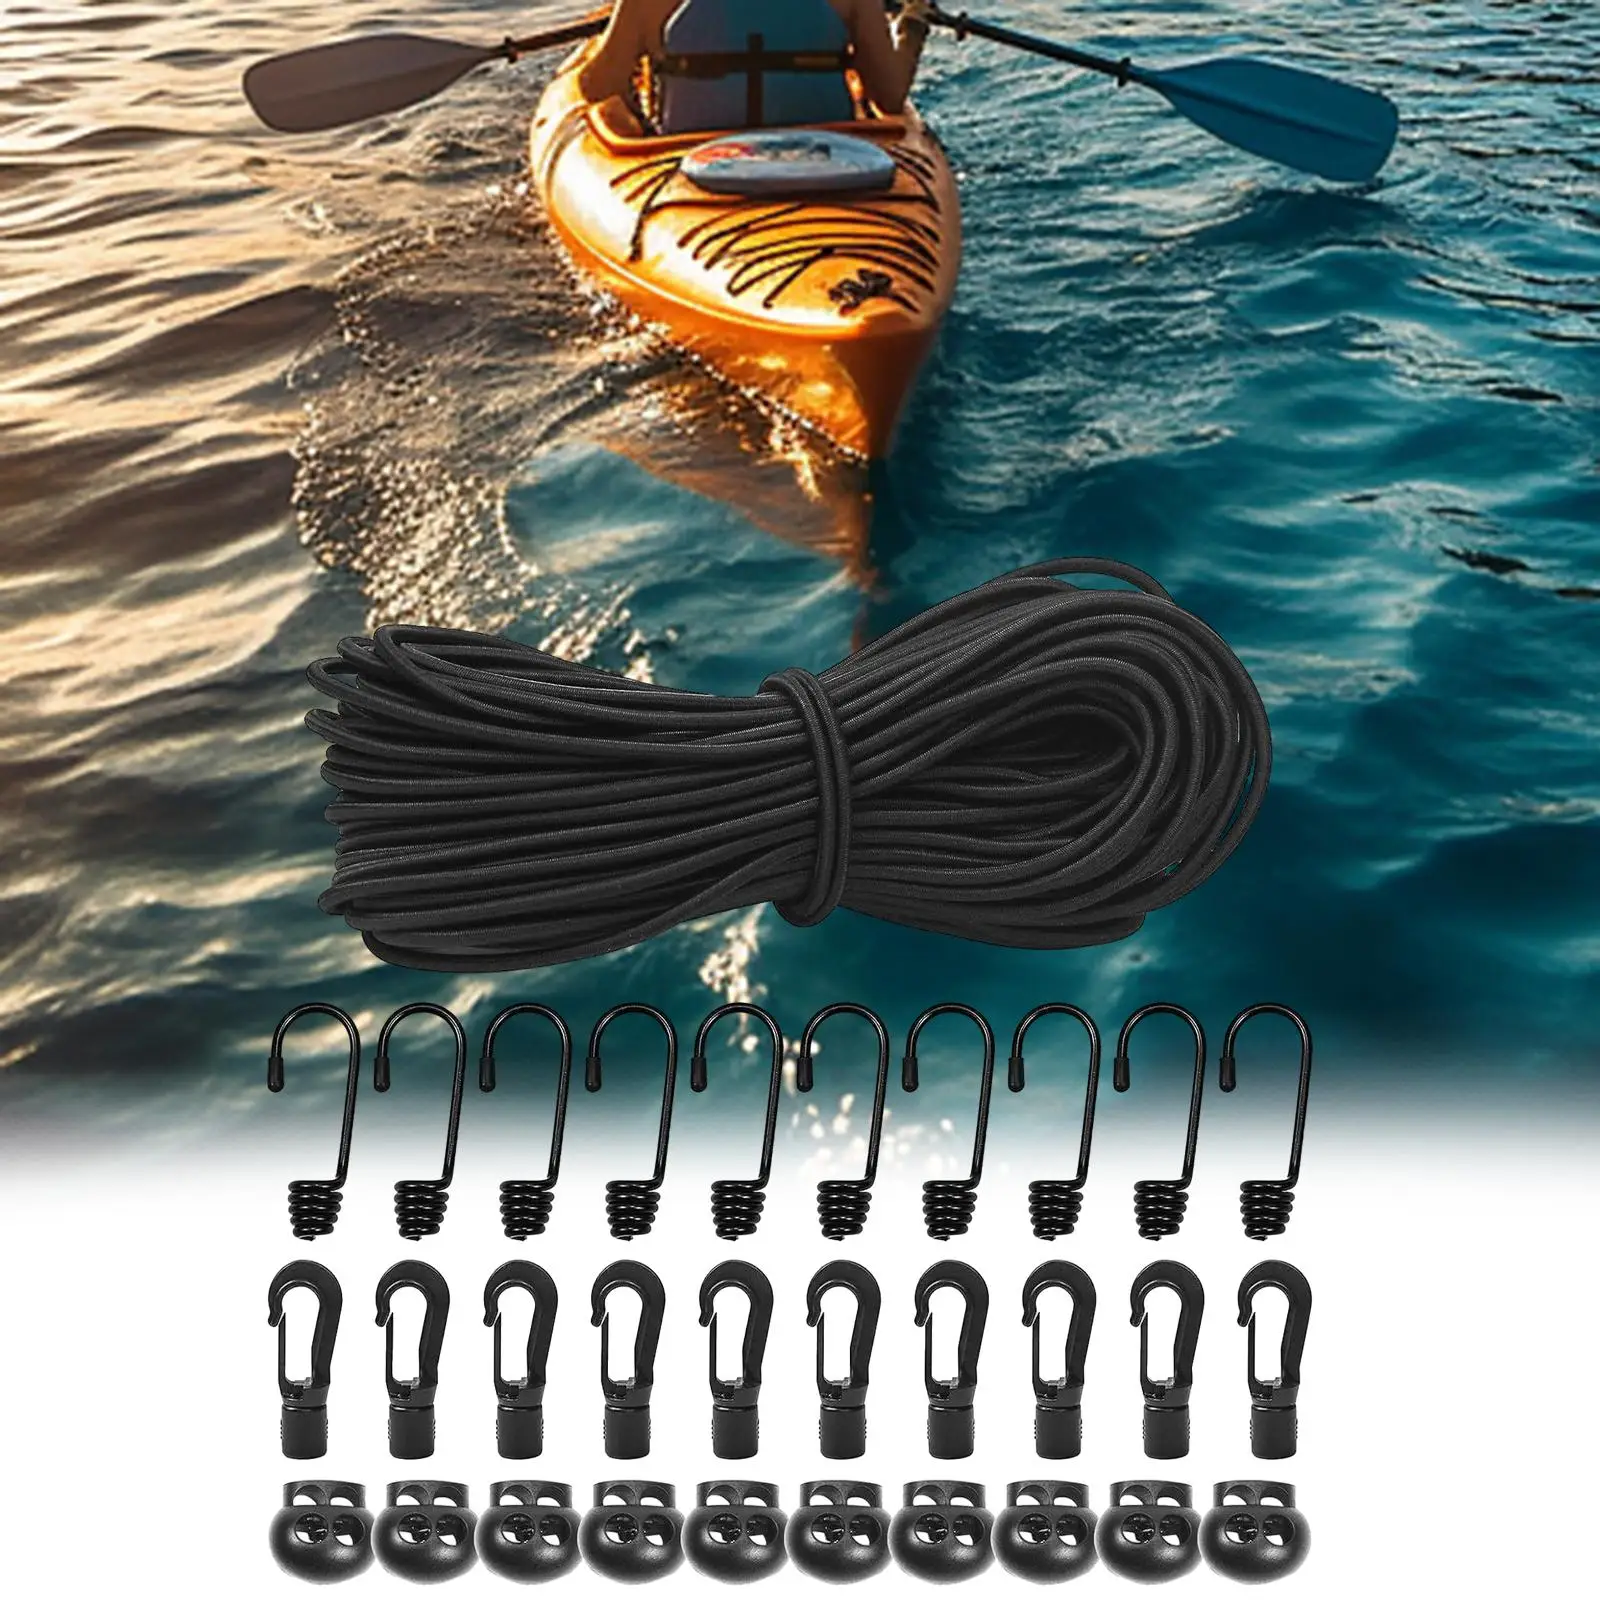 Elastic Bungee Shock Cord Canopy Tarp Cord 15M Length Kayak Bungee Kit for Outdoor Activities Water Sports Camping Boat